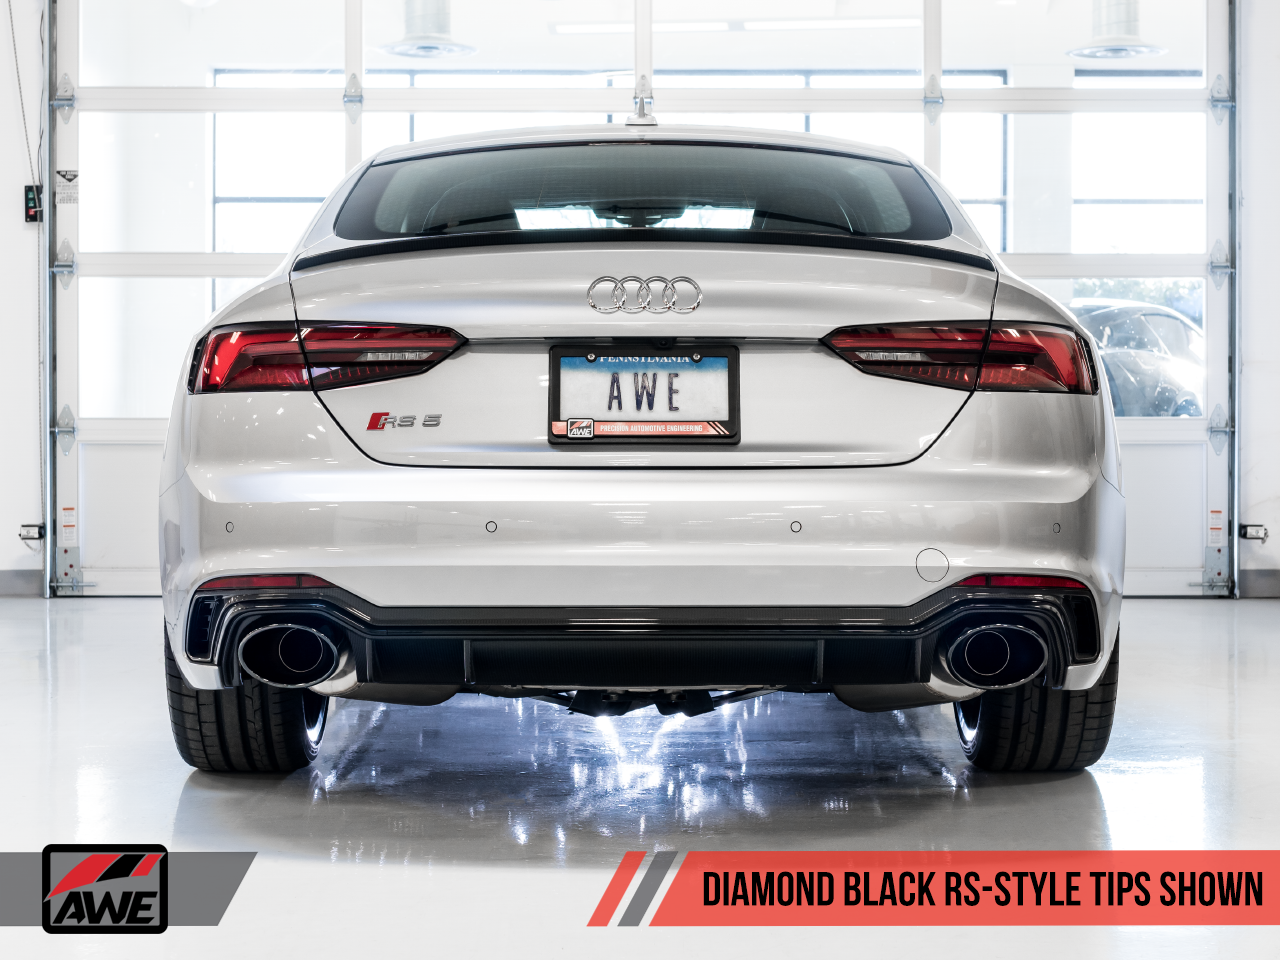 AWE Touring Edition Exhaust for Audi B9 RS 5 Coupe - Resonated for Performance Catalysts - Diamond Black RS-style Tips - Motorsports LA